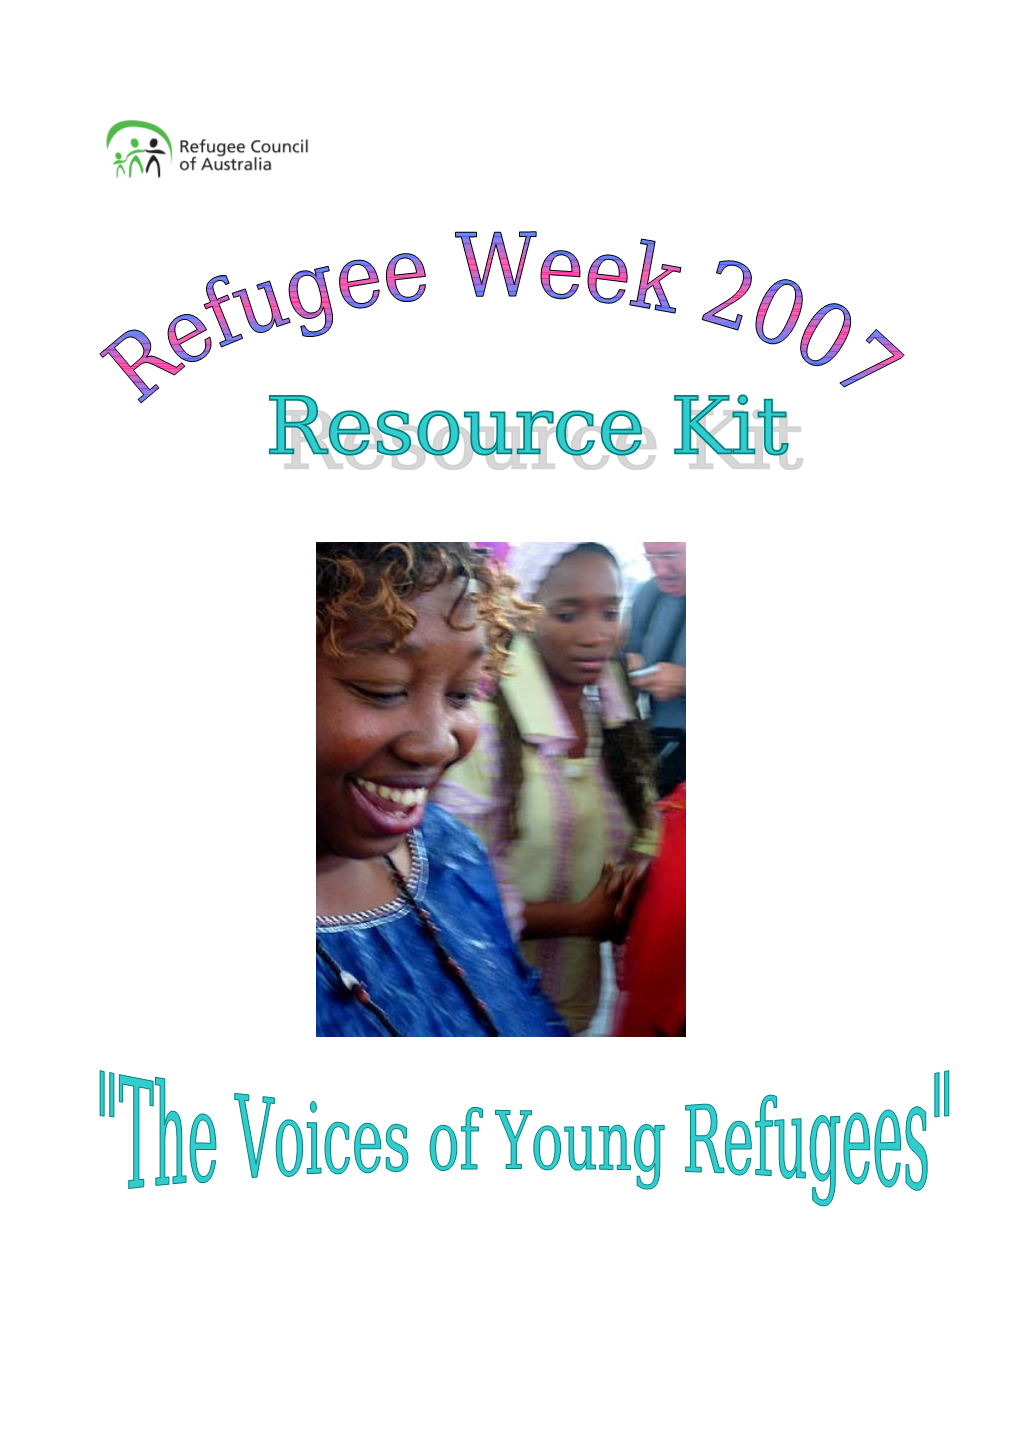 1. Refugees and Refugee Week Stats and Facts